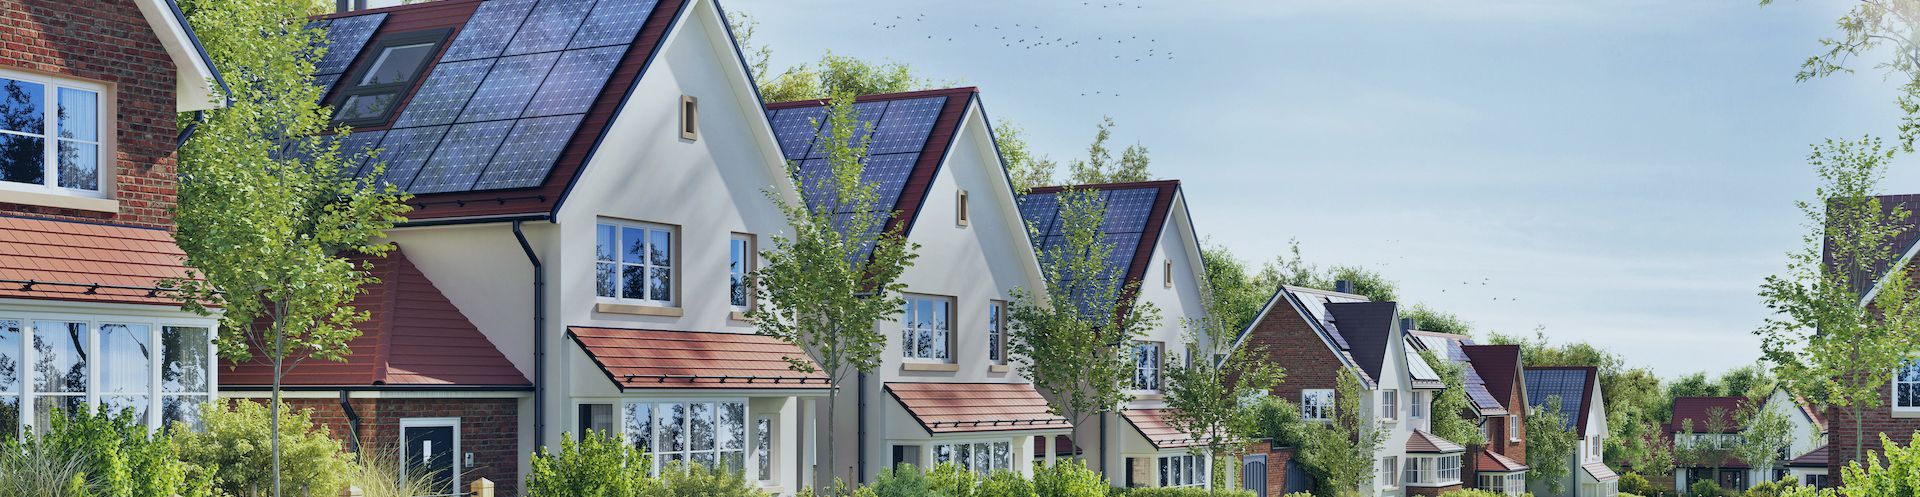 a row of houses with solar panels on the roofs .